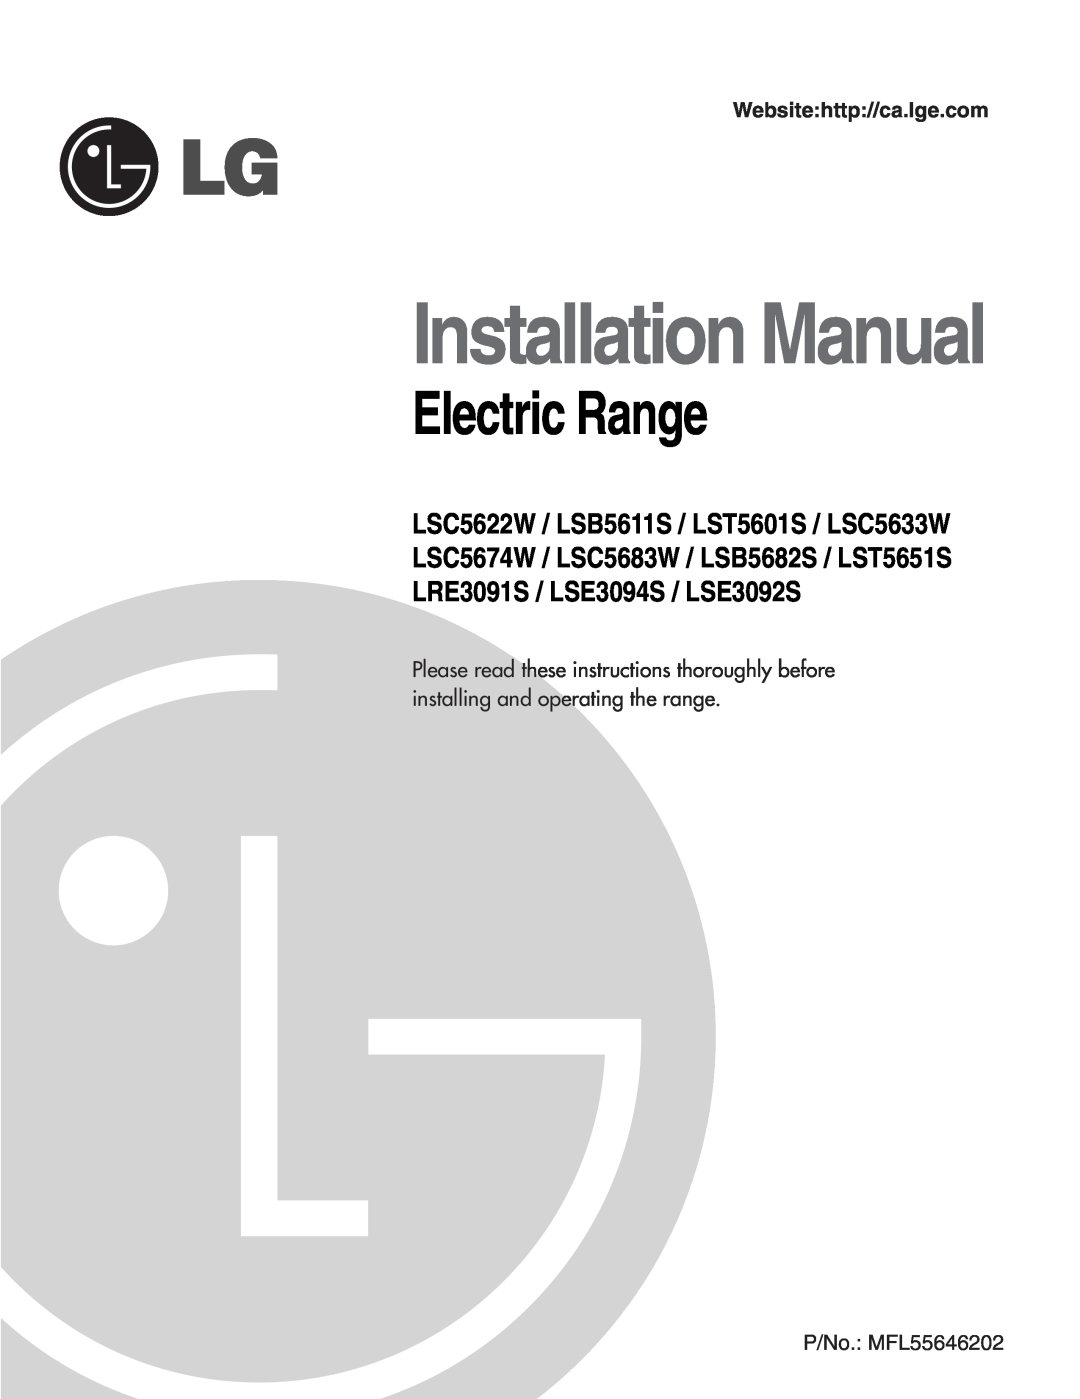 LG Electronics LRE3091S installation manual Electric Range, Installation Manual, Models, LRE30955S, LSE3094S, LRE30855S 